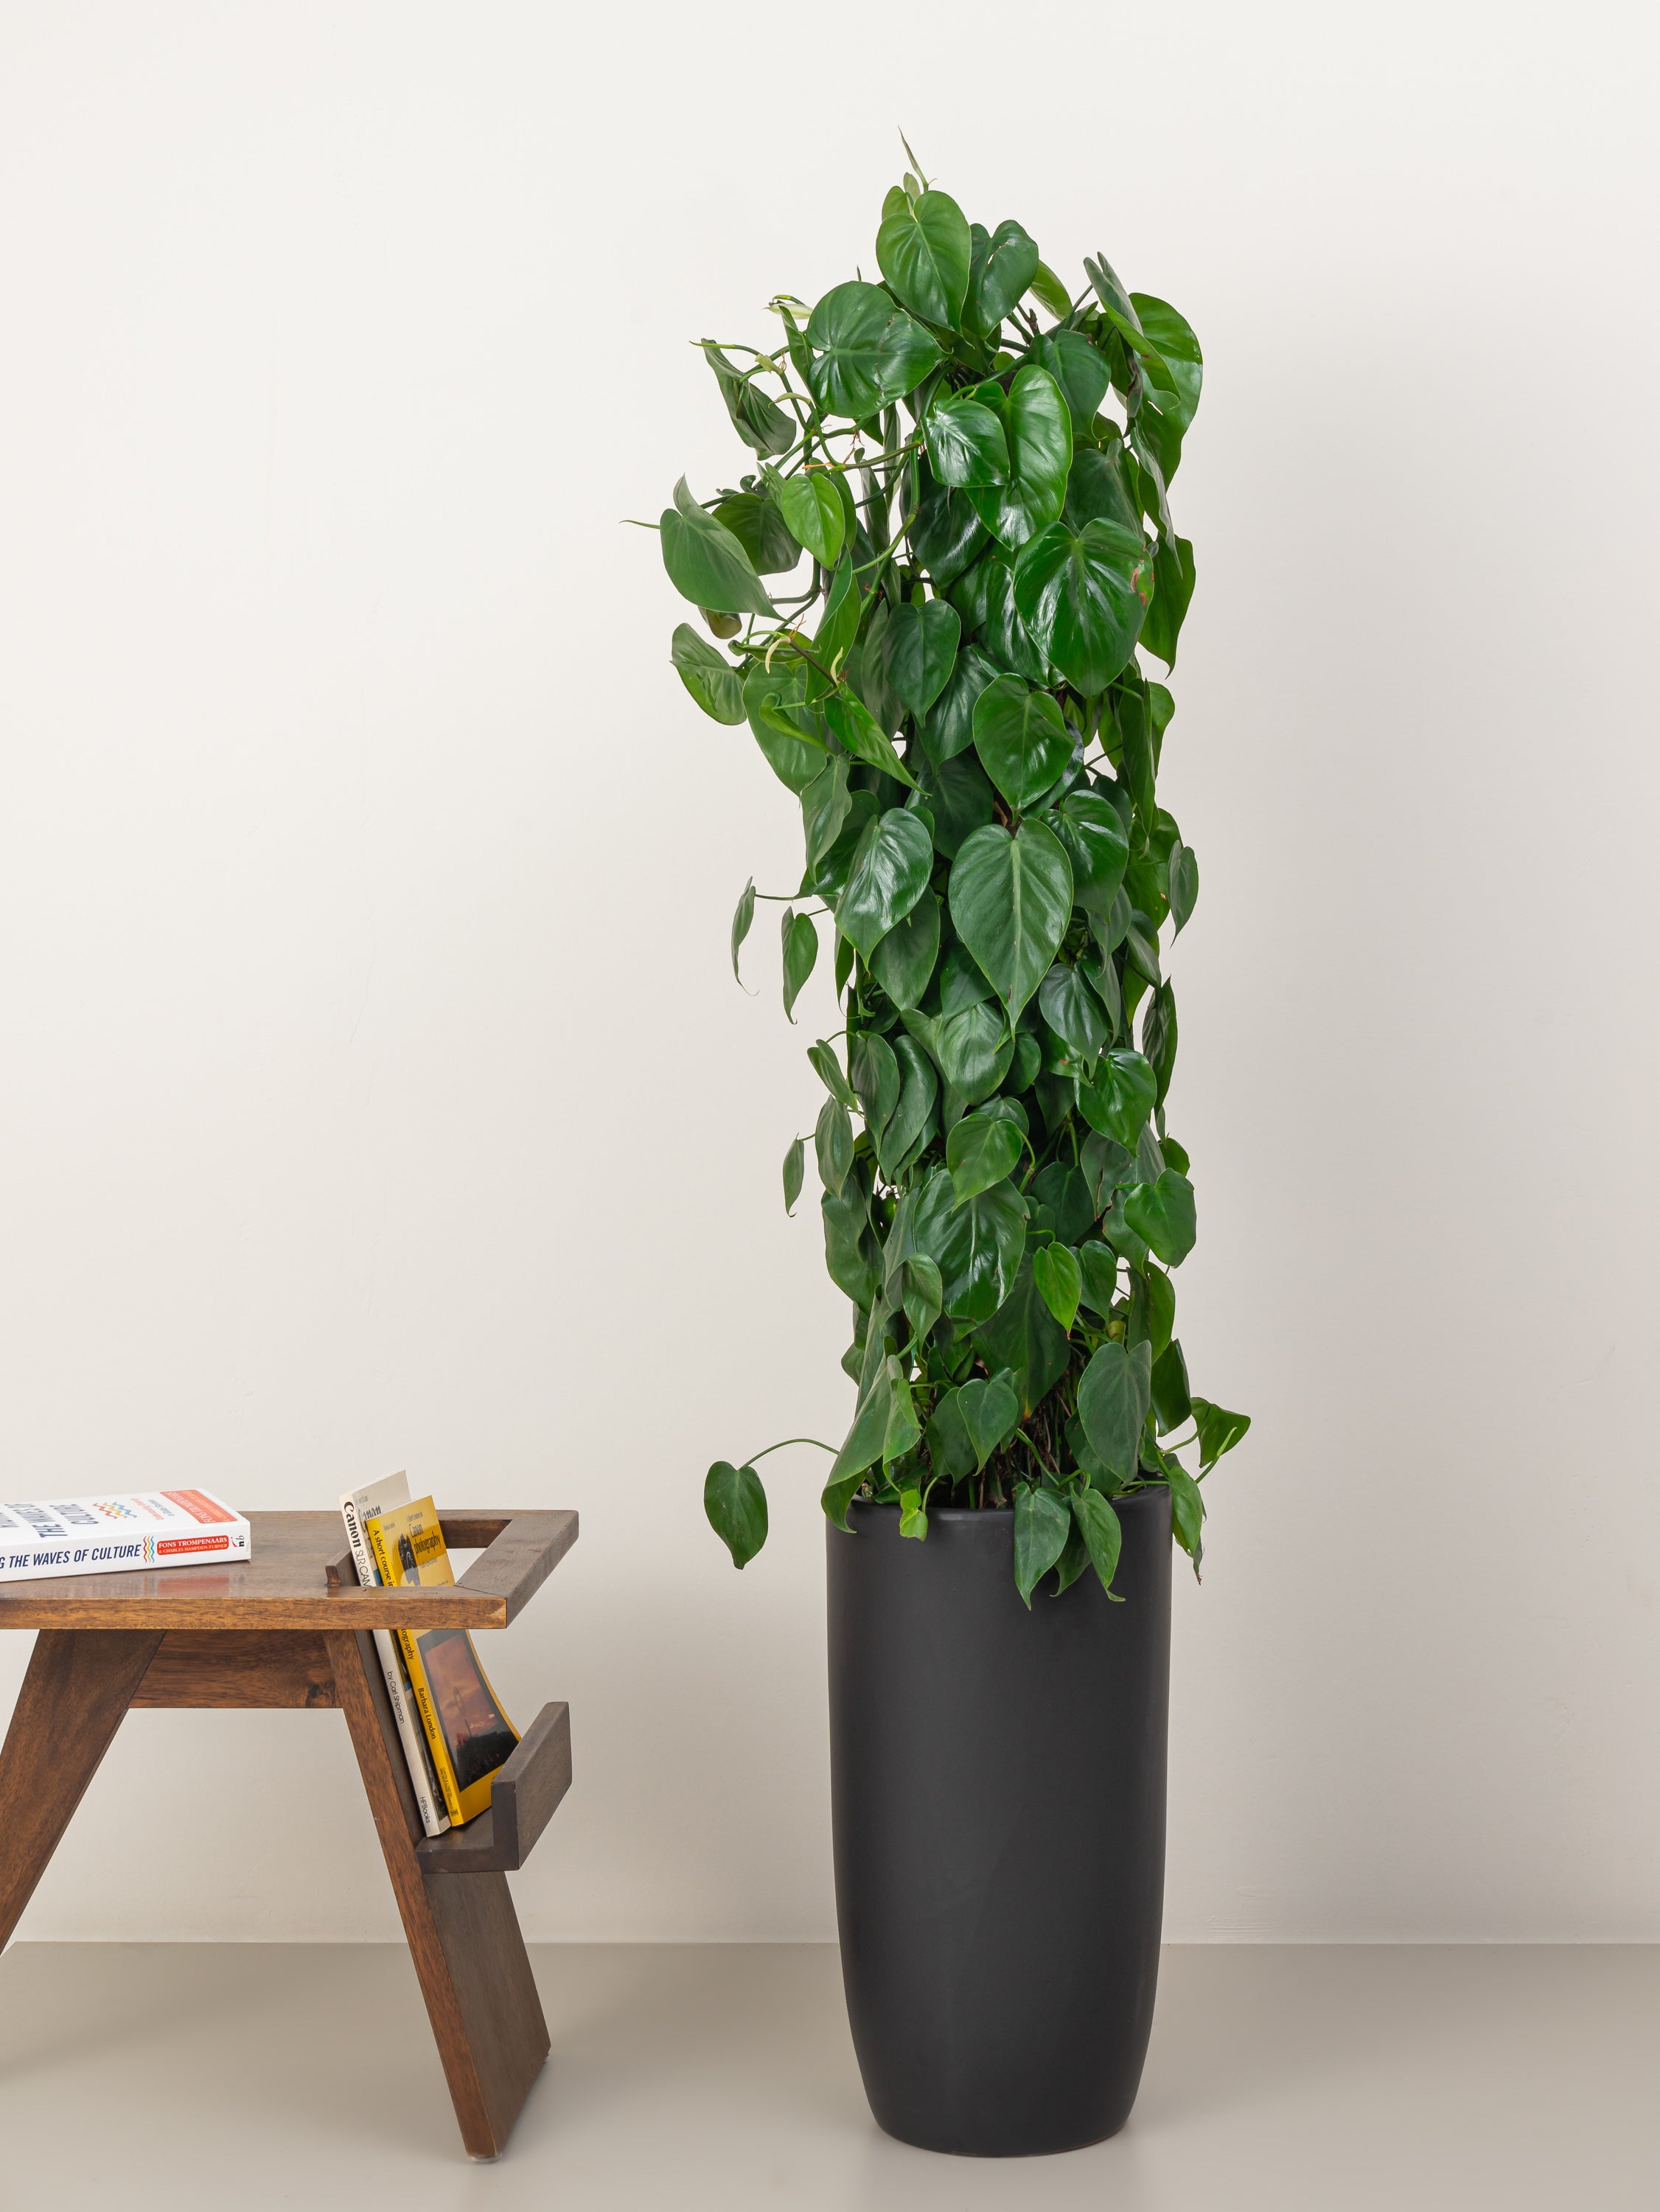 Philodendron Scandens Climber